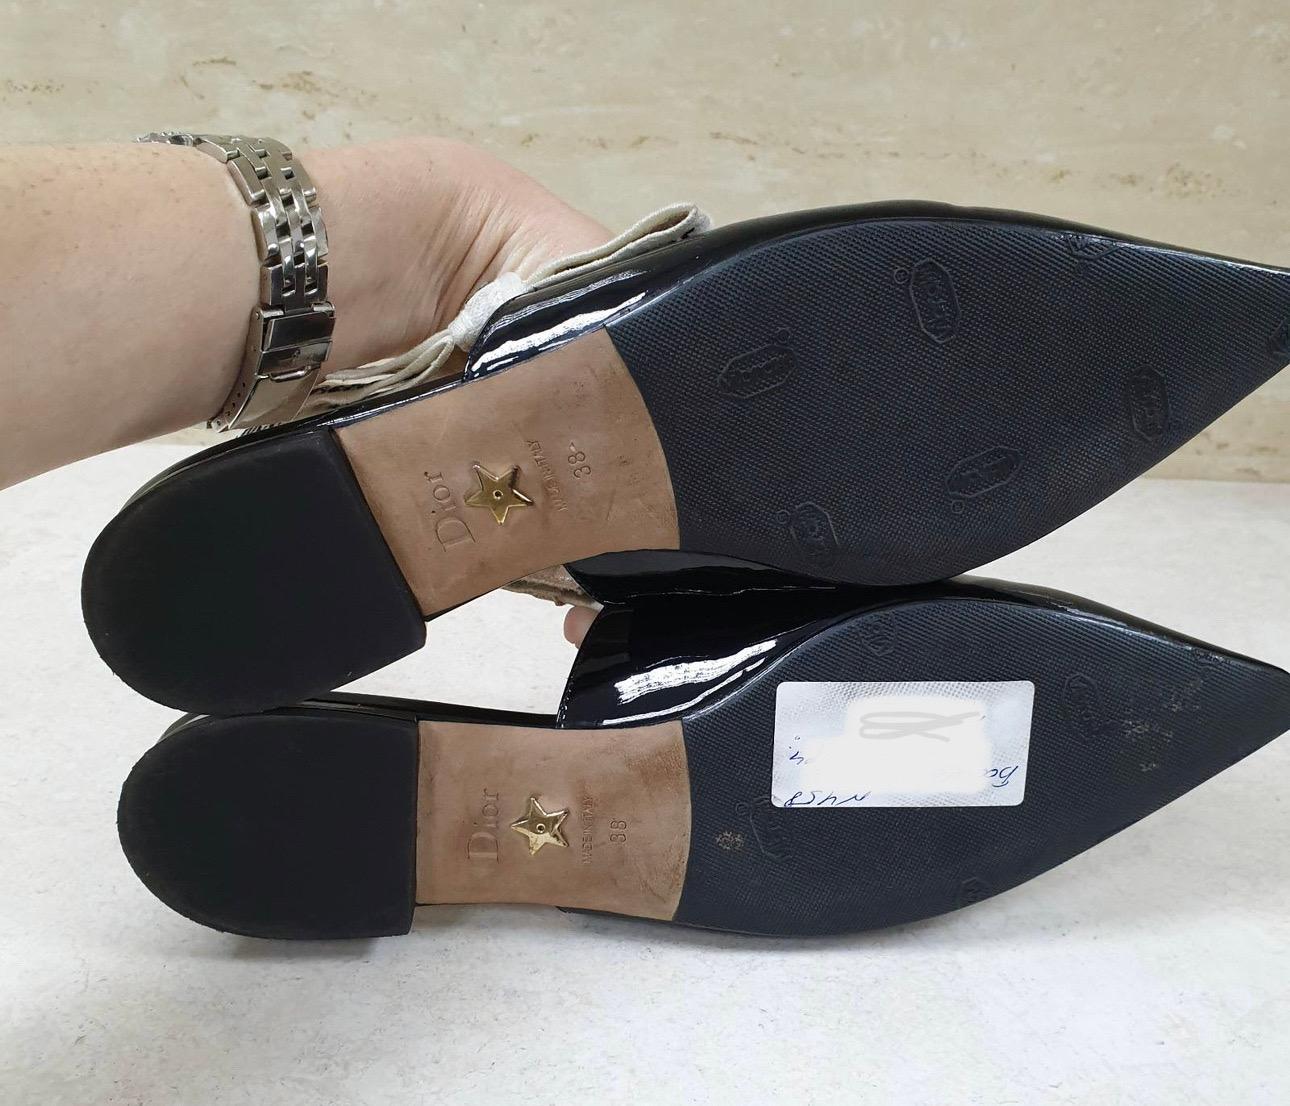  Dior J'adior Black Patent Leather Slingback Flats In Good Condition For Sale In Krakow, PL